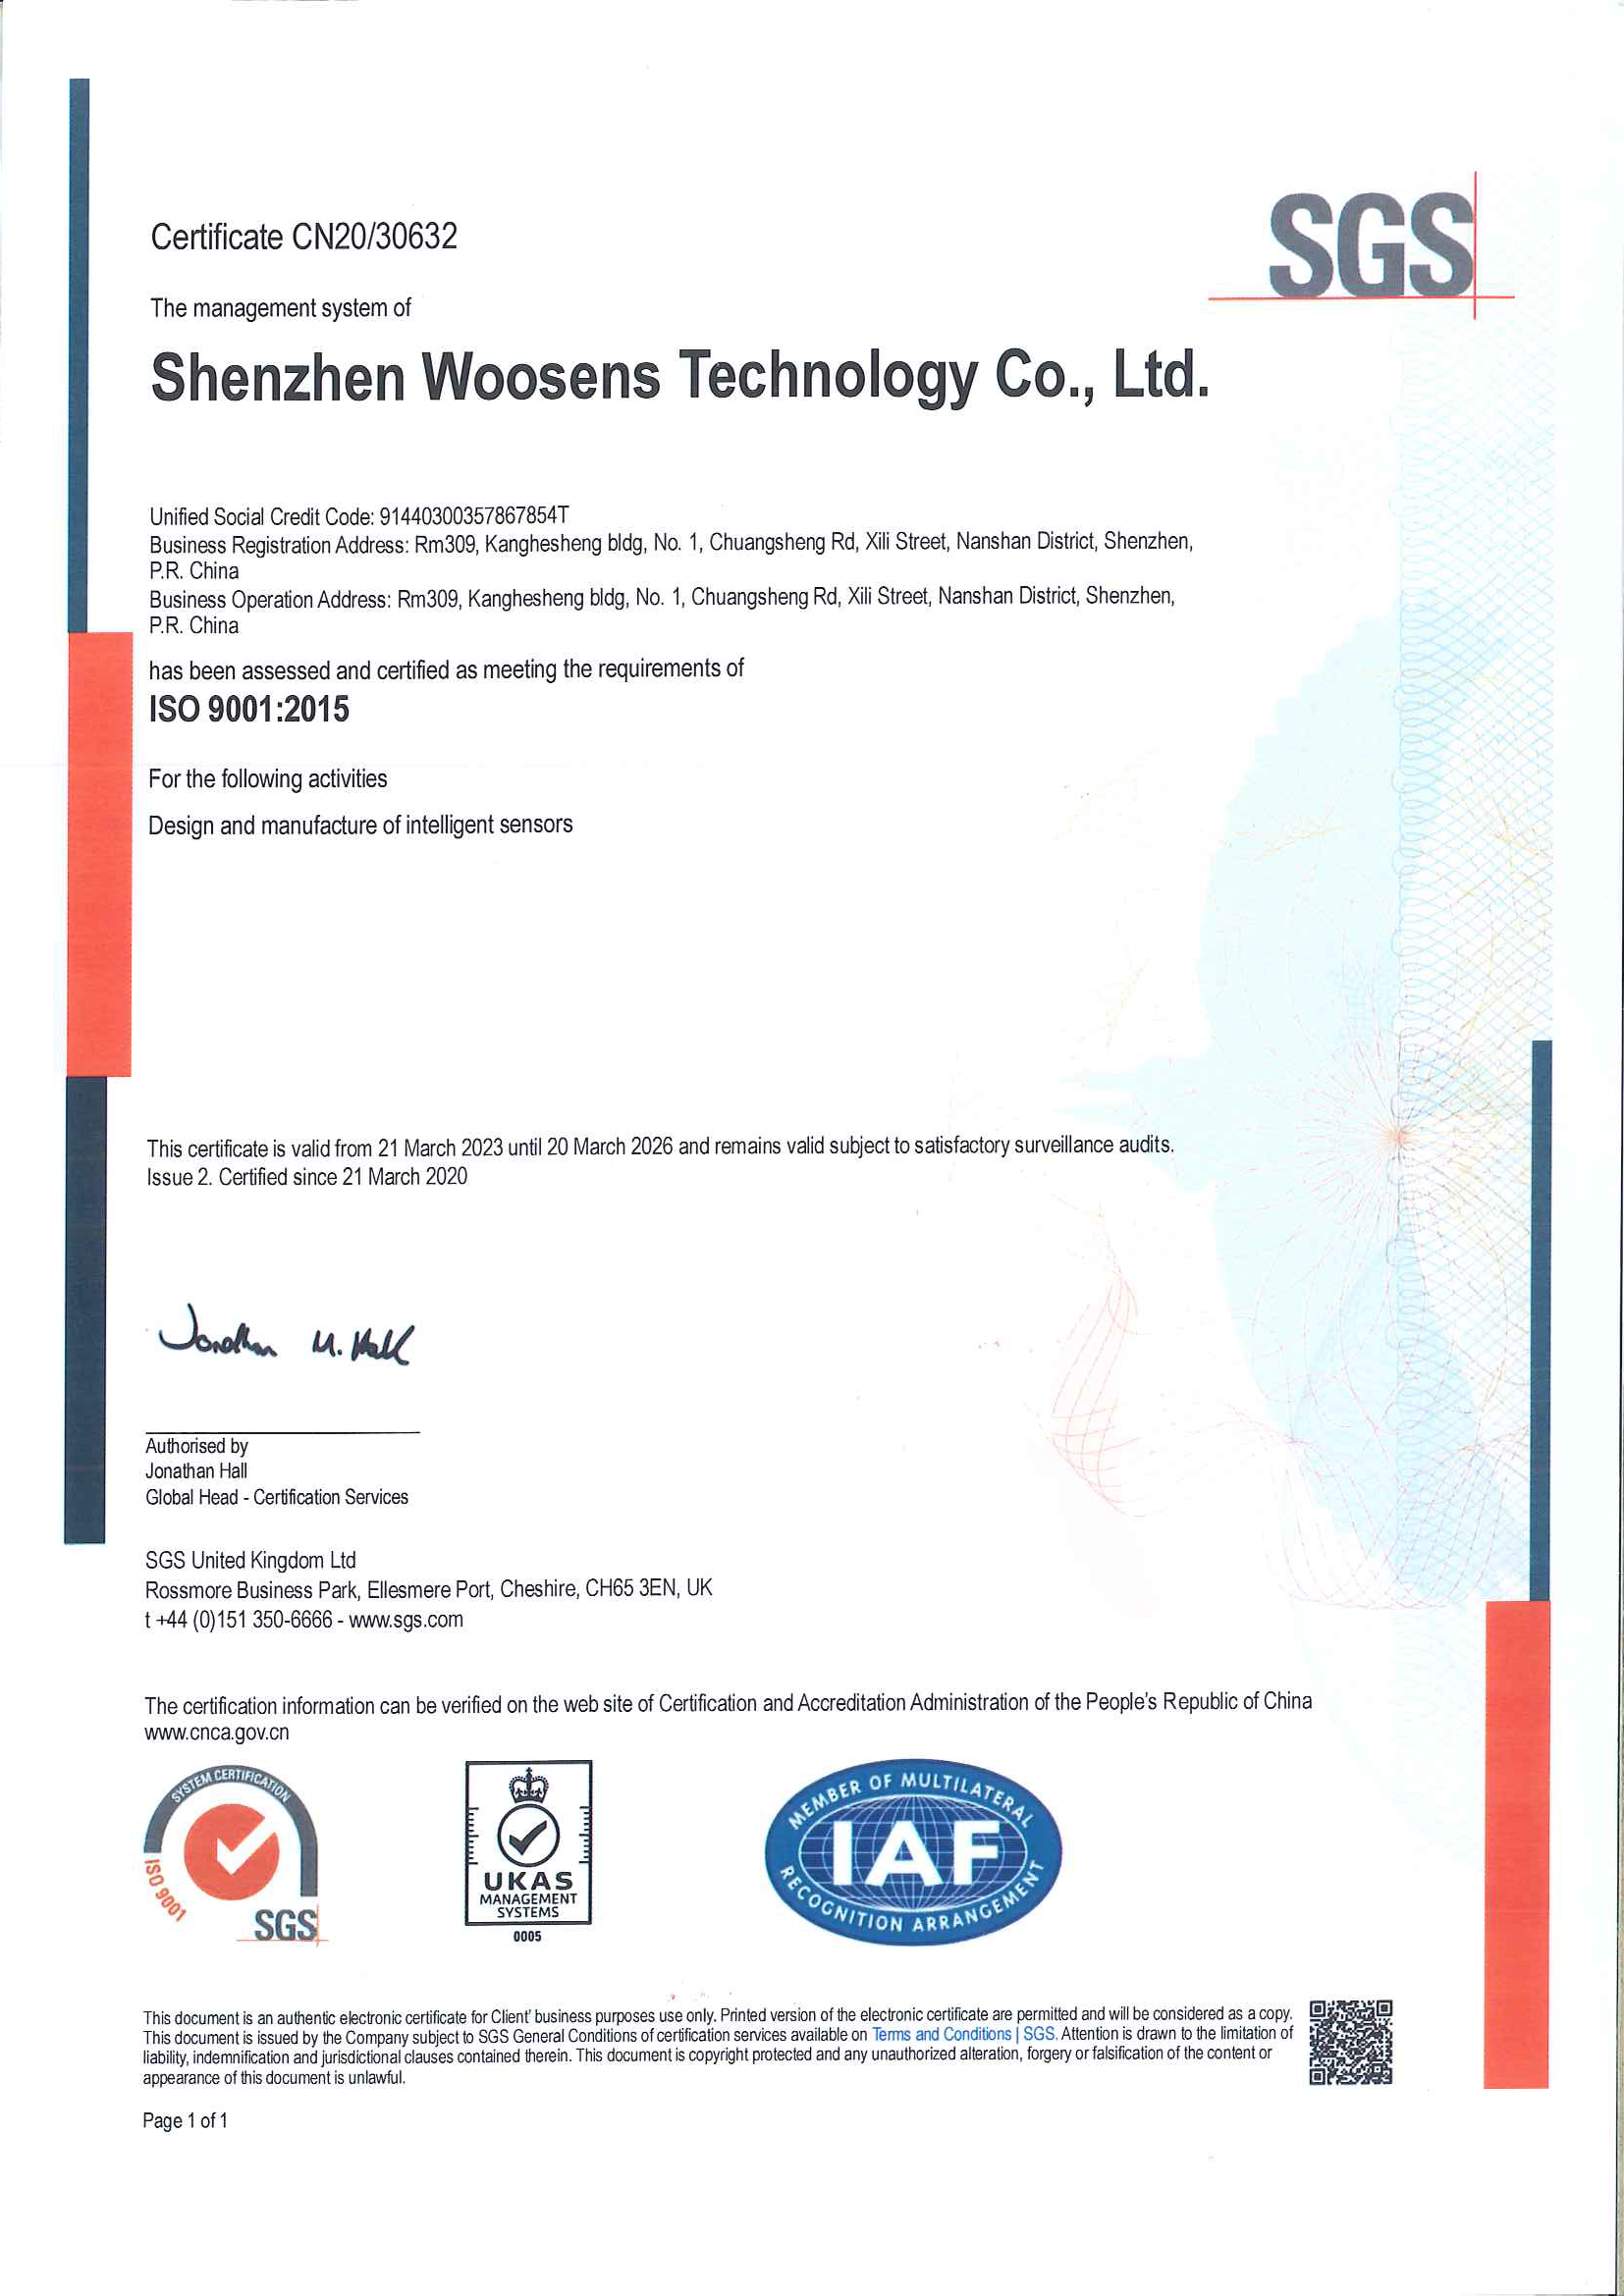 Woosens Technology's quality system has passed the SGS recertification.